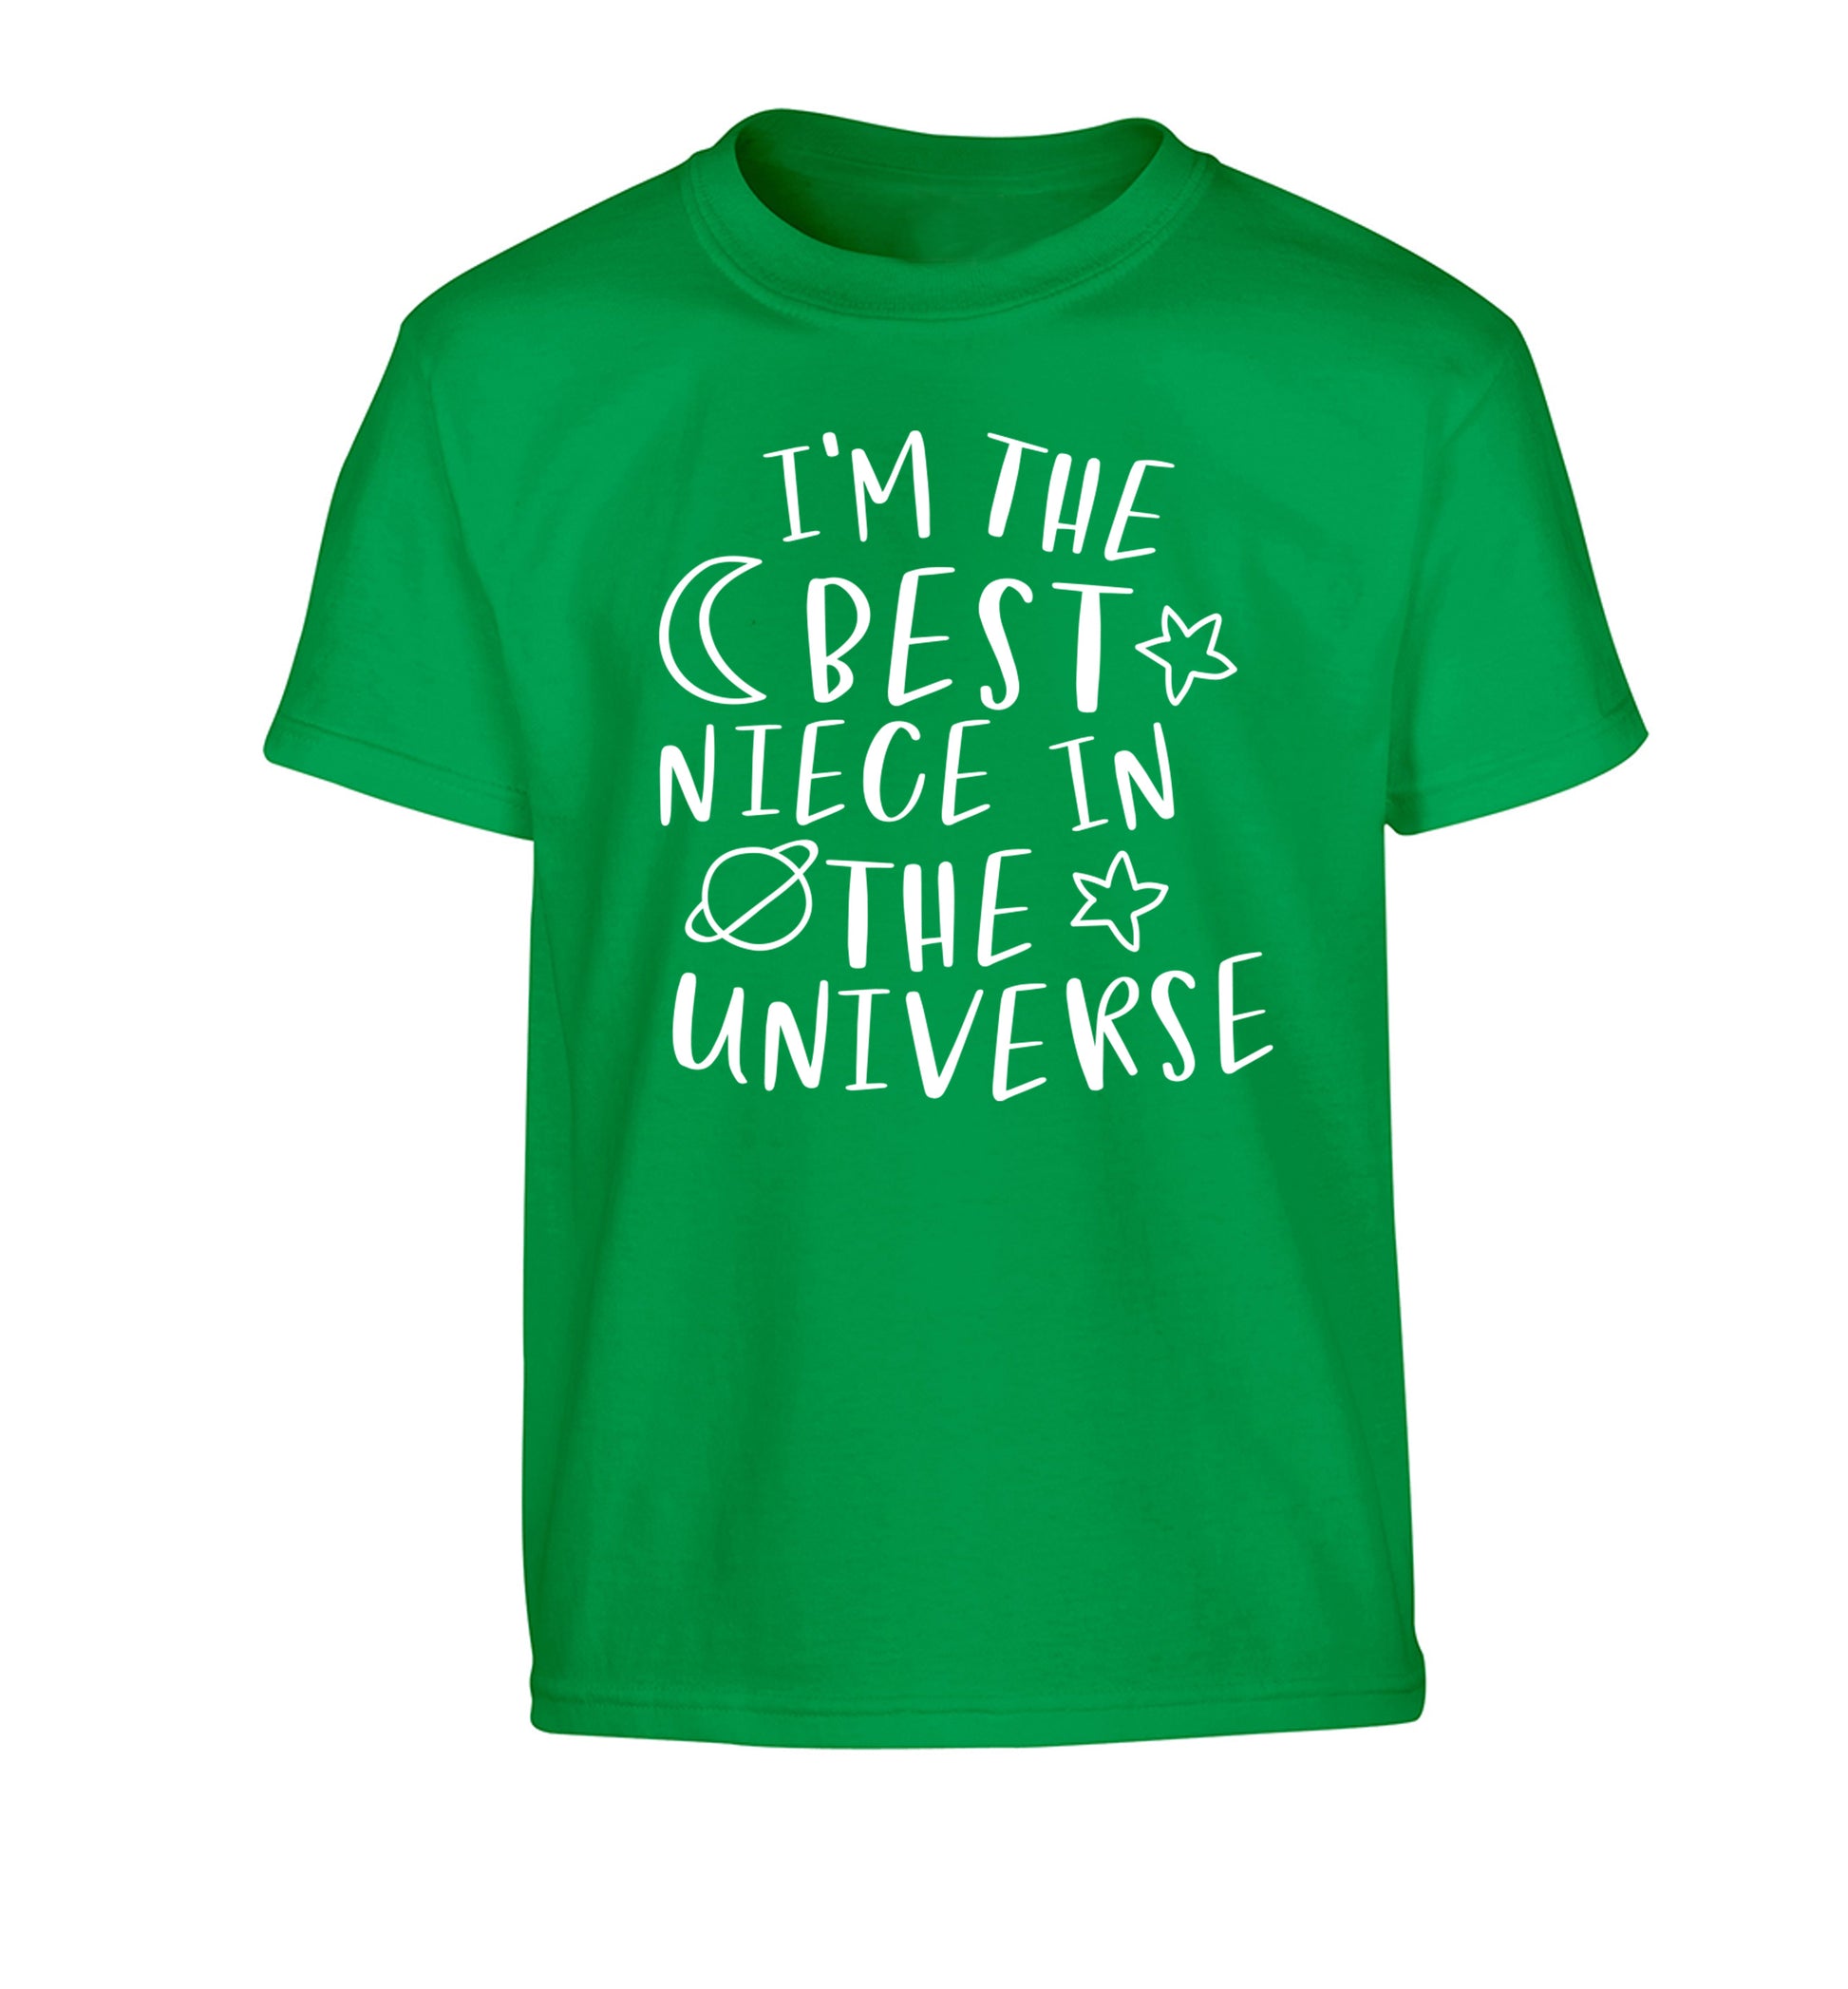 I'm the best niece in the universe Children's green Tshirt 12-13 Years